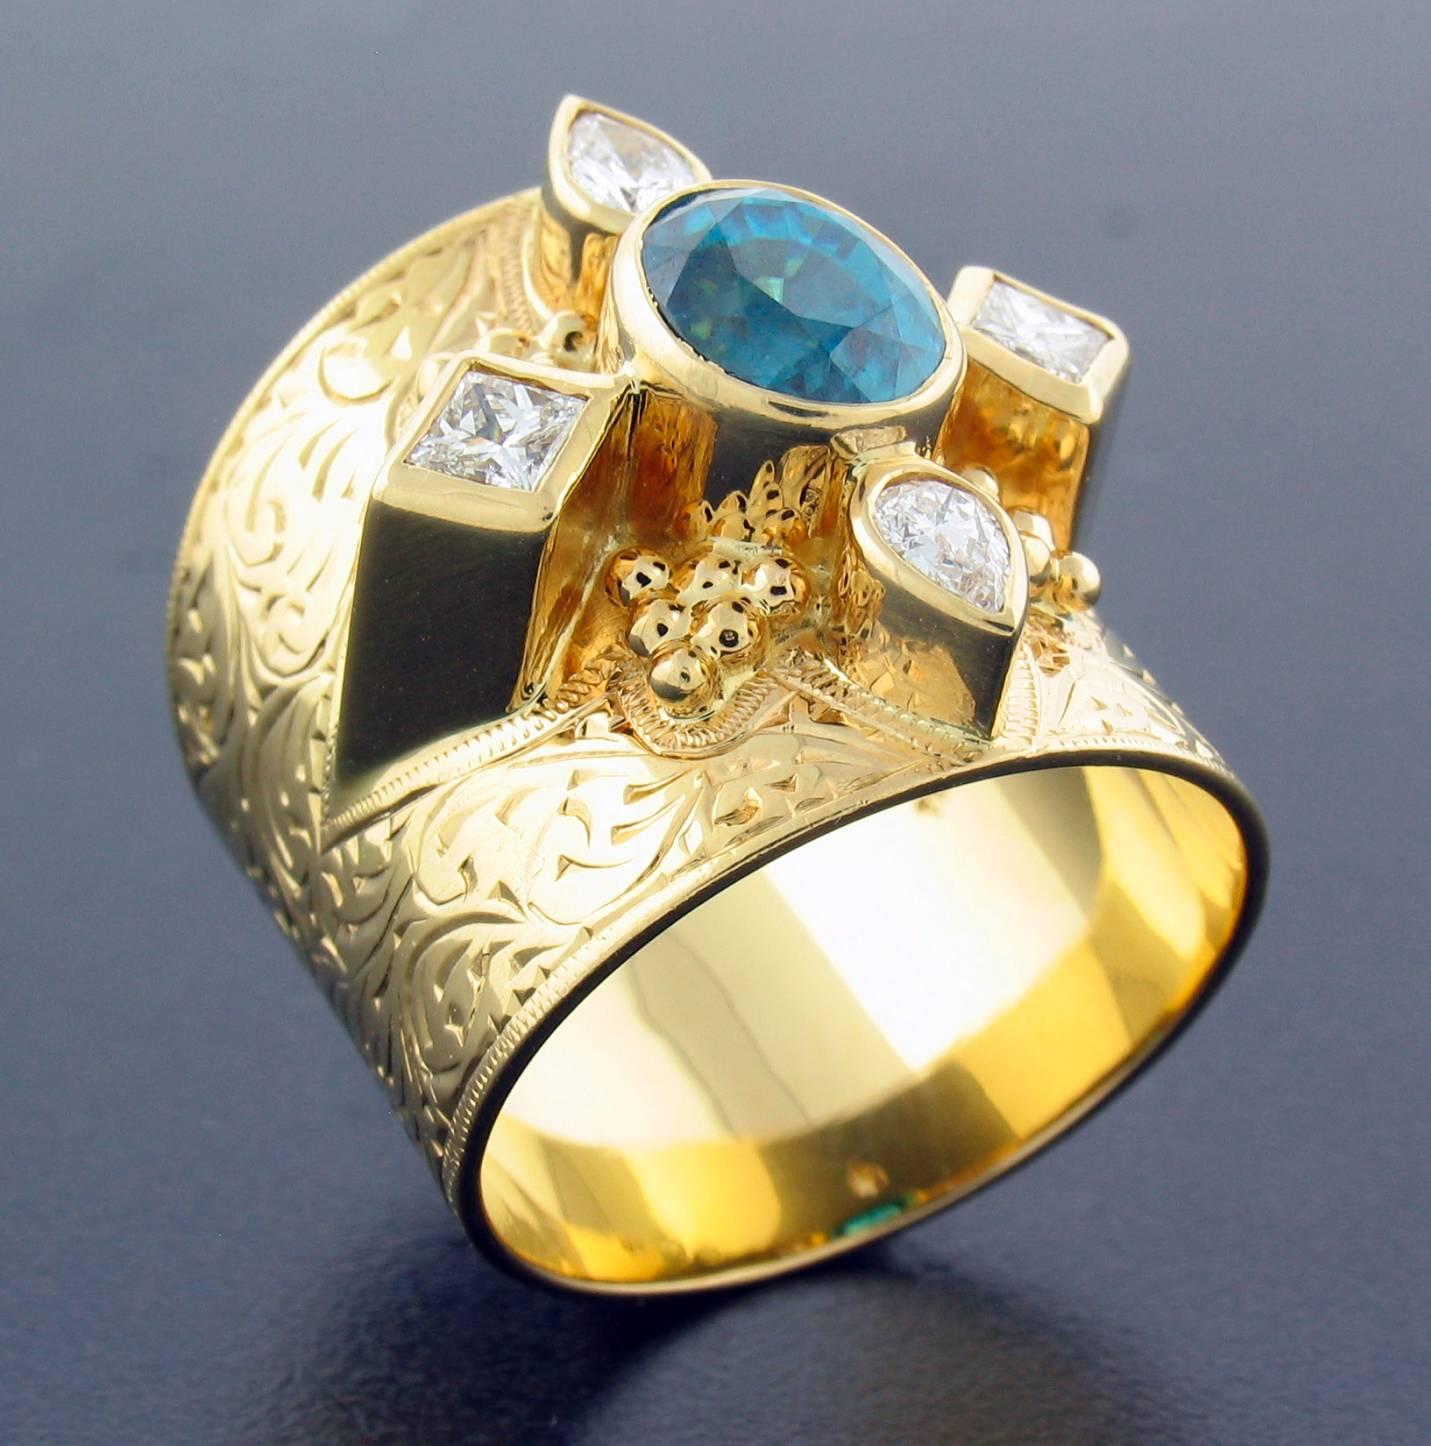 This ring was designed and made by well known designer Paula Crevoshay.  It contains a Natural Blue Zircon weighing 2.80 carats, and Diamonds weighing 0.52 carats.  It is made entirely in 18k yellow gold  The size is approximately a 7 1/2 ~ 8.  Wide